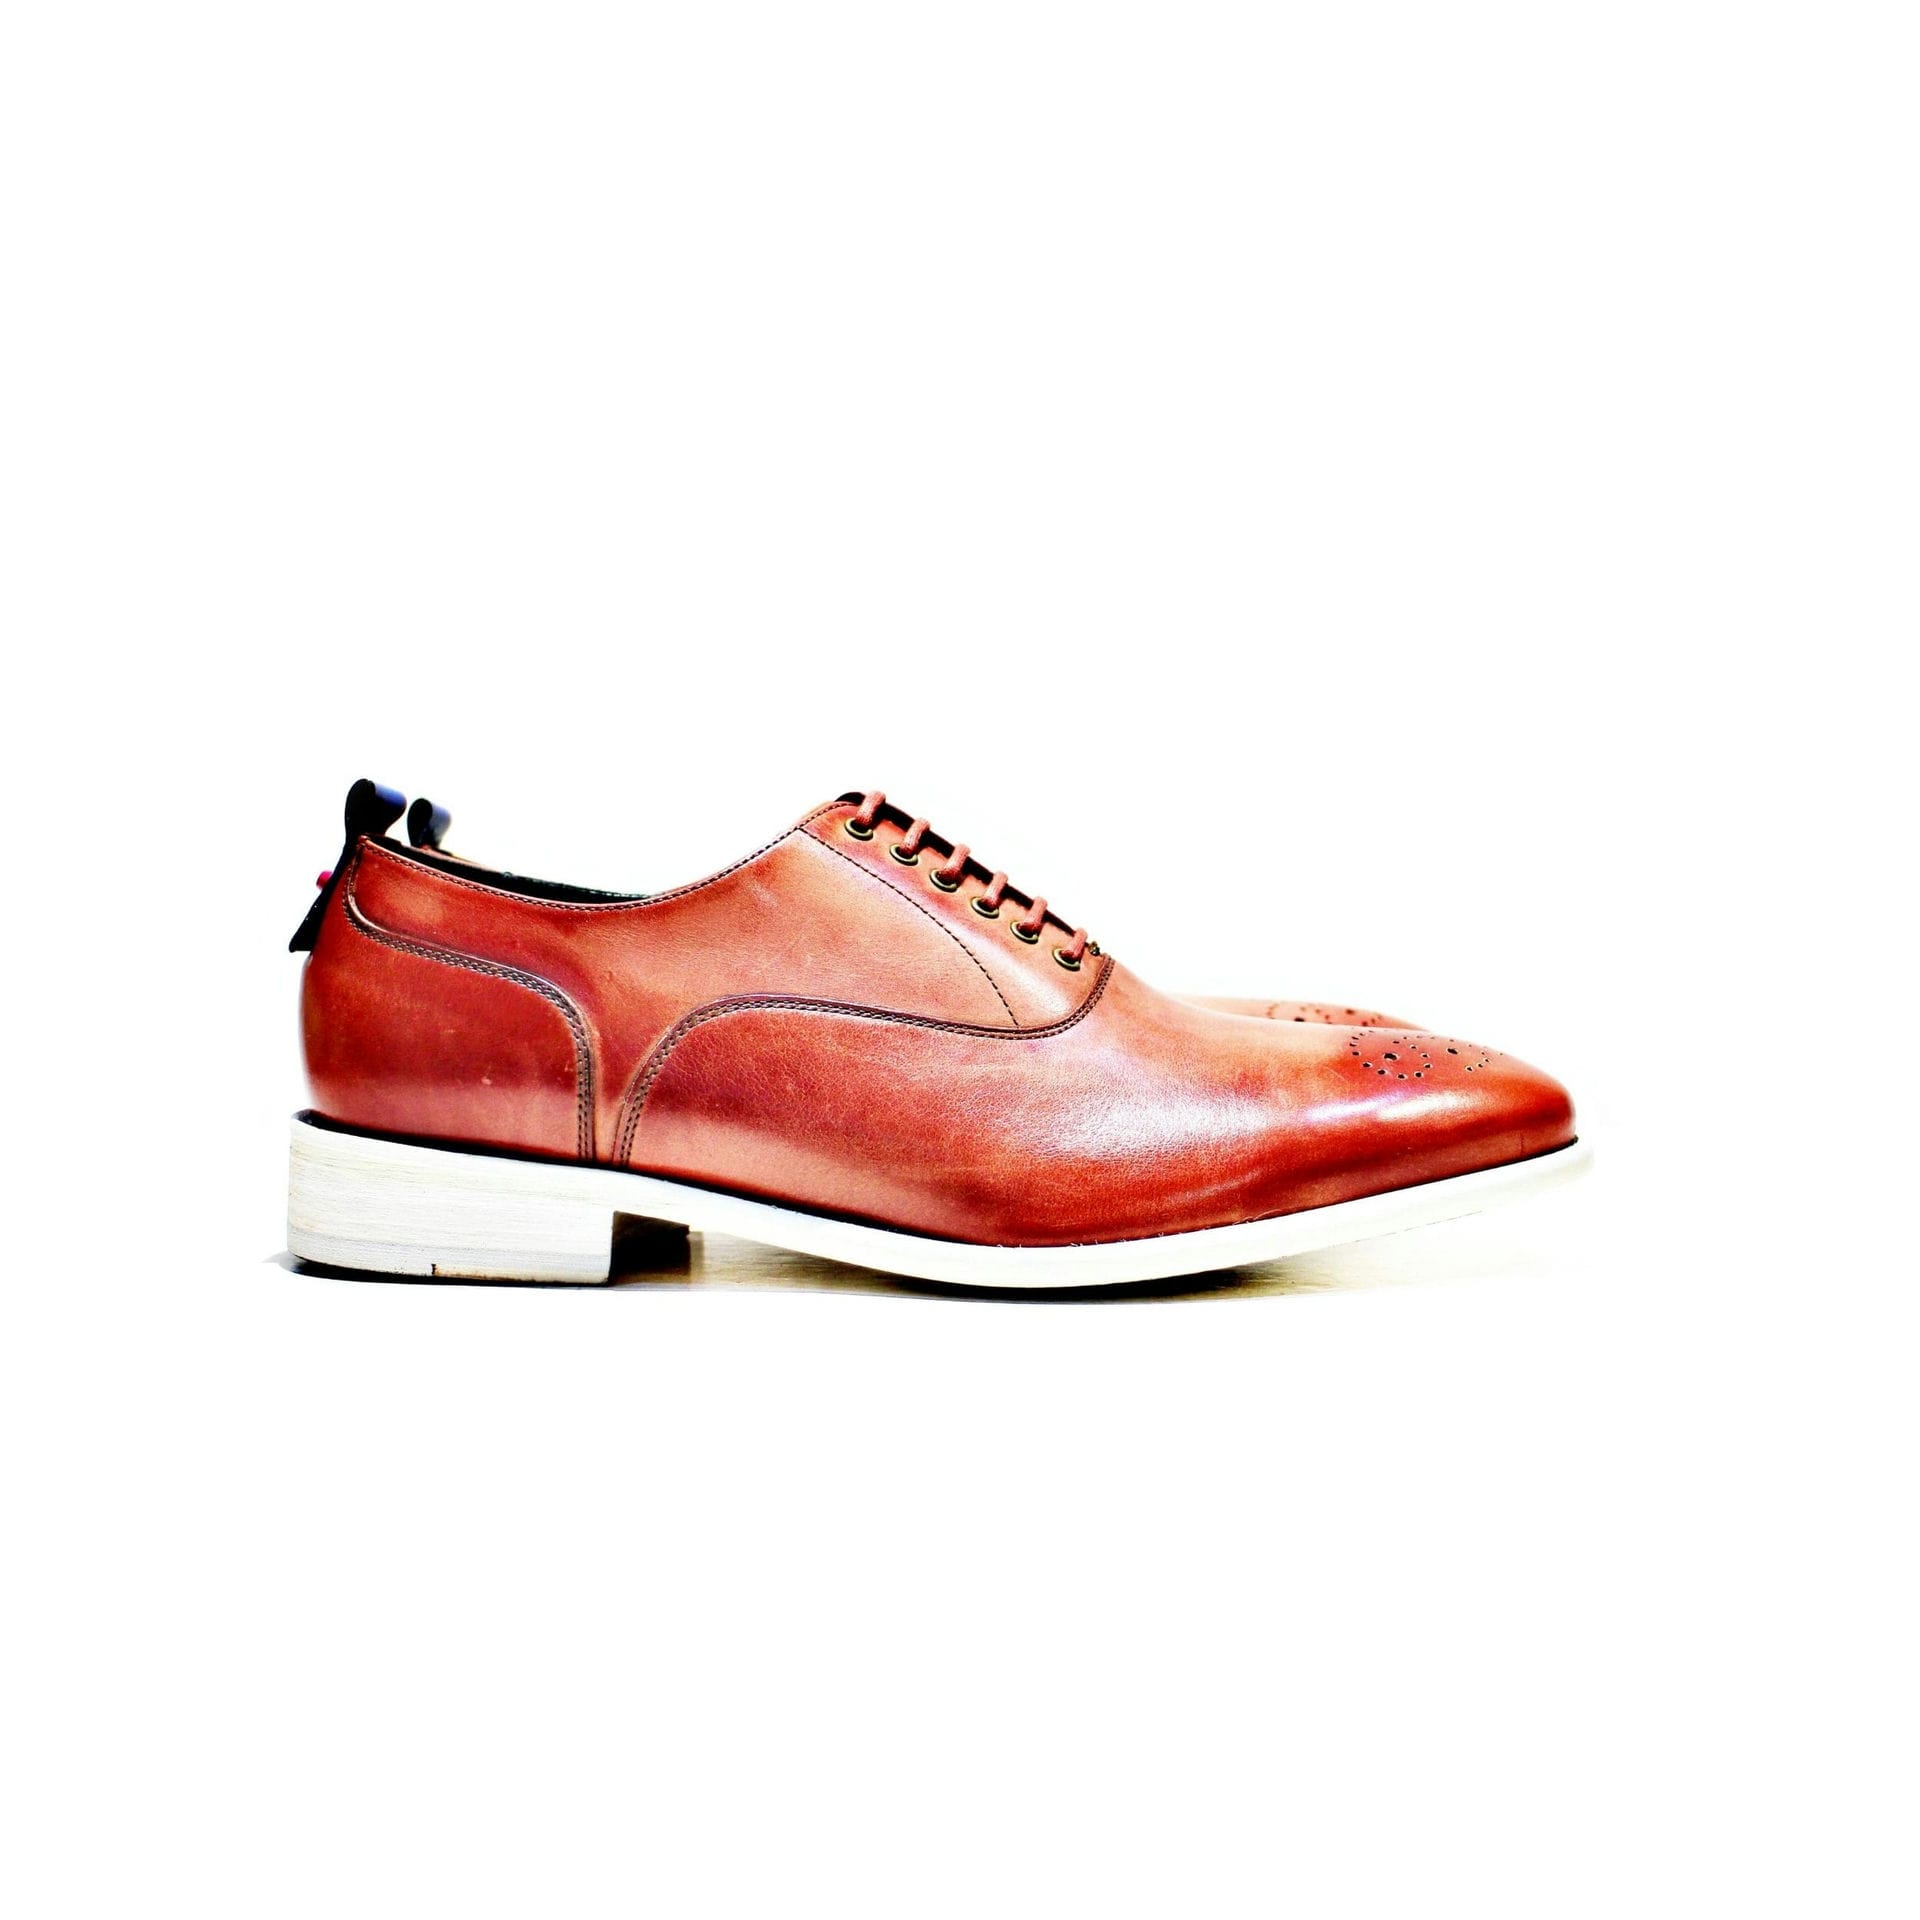 All leather shoe, inwardly, as well as the sole. Handmade in Portugal “walk with pintta”